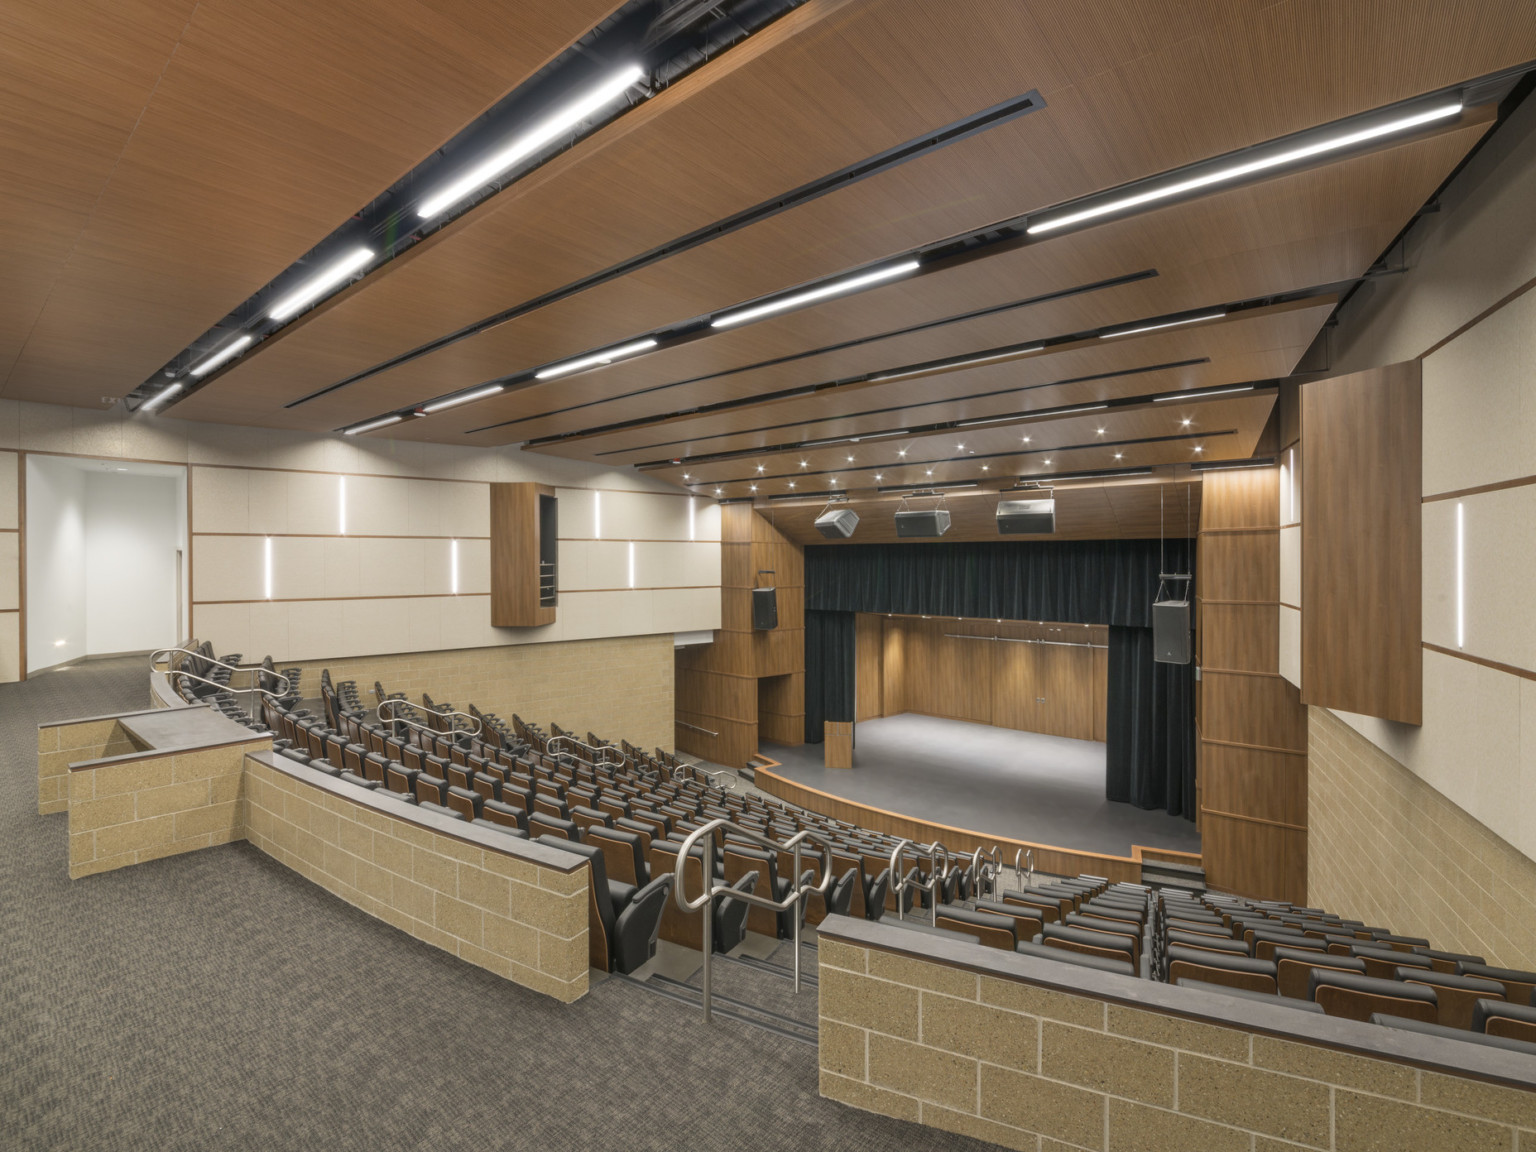 600 seat auditorium with wood acoustic panels overhead and framing stage with black curtains